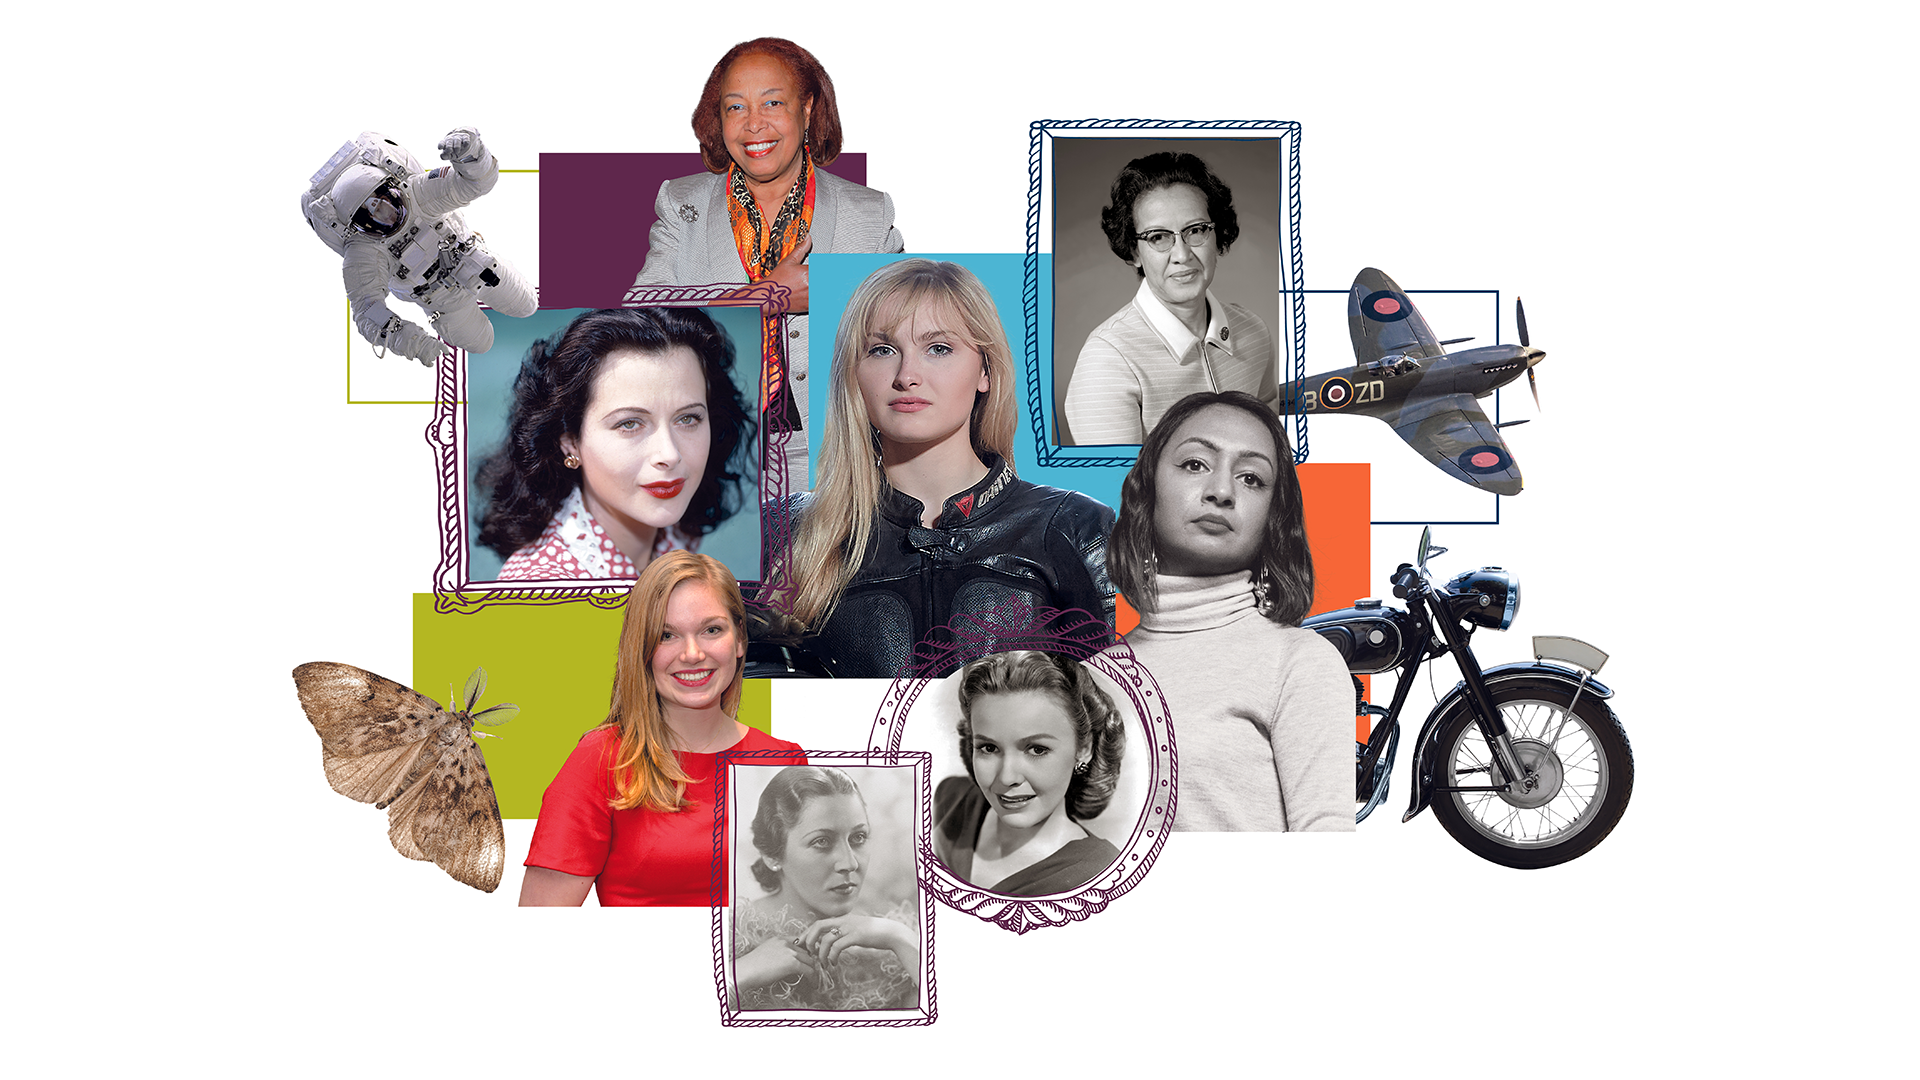 The IET's new exhibition focuses on women in engineering, past and present.